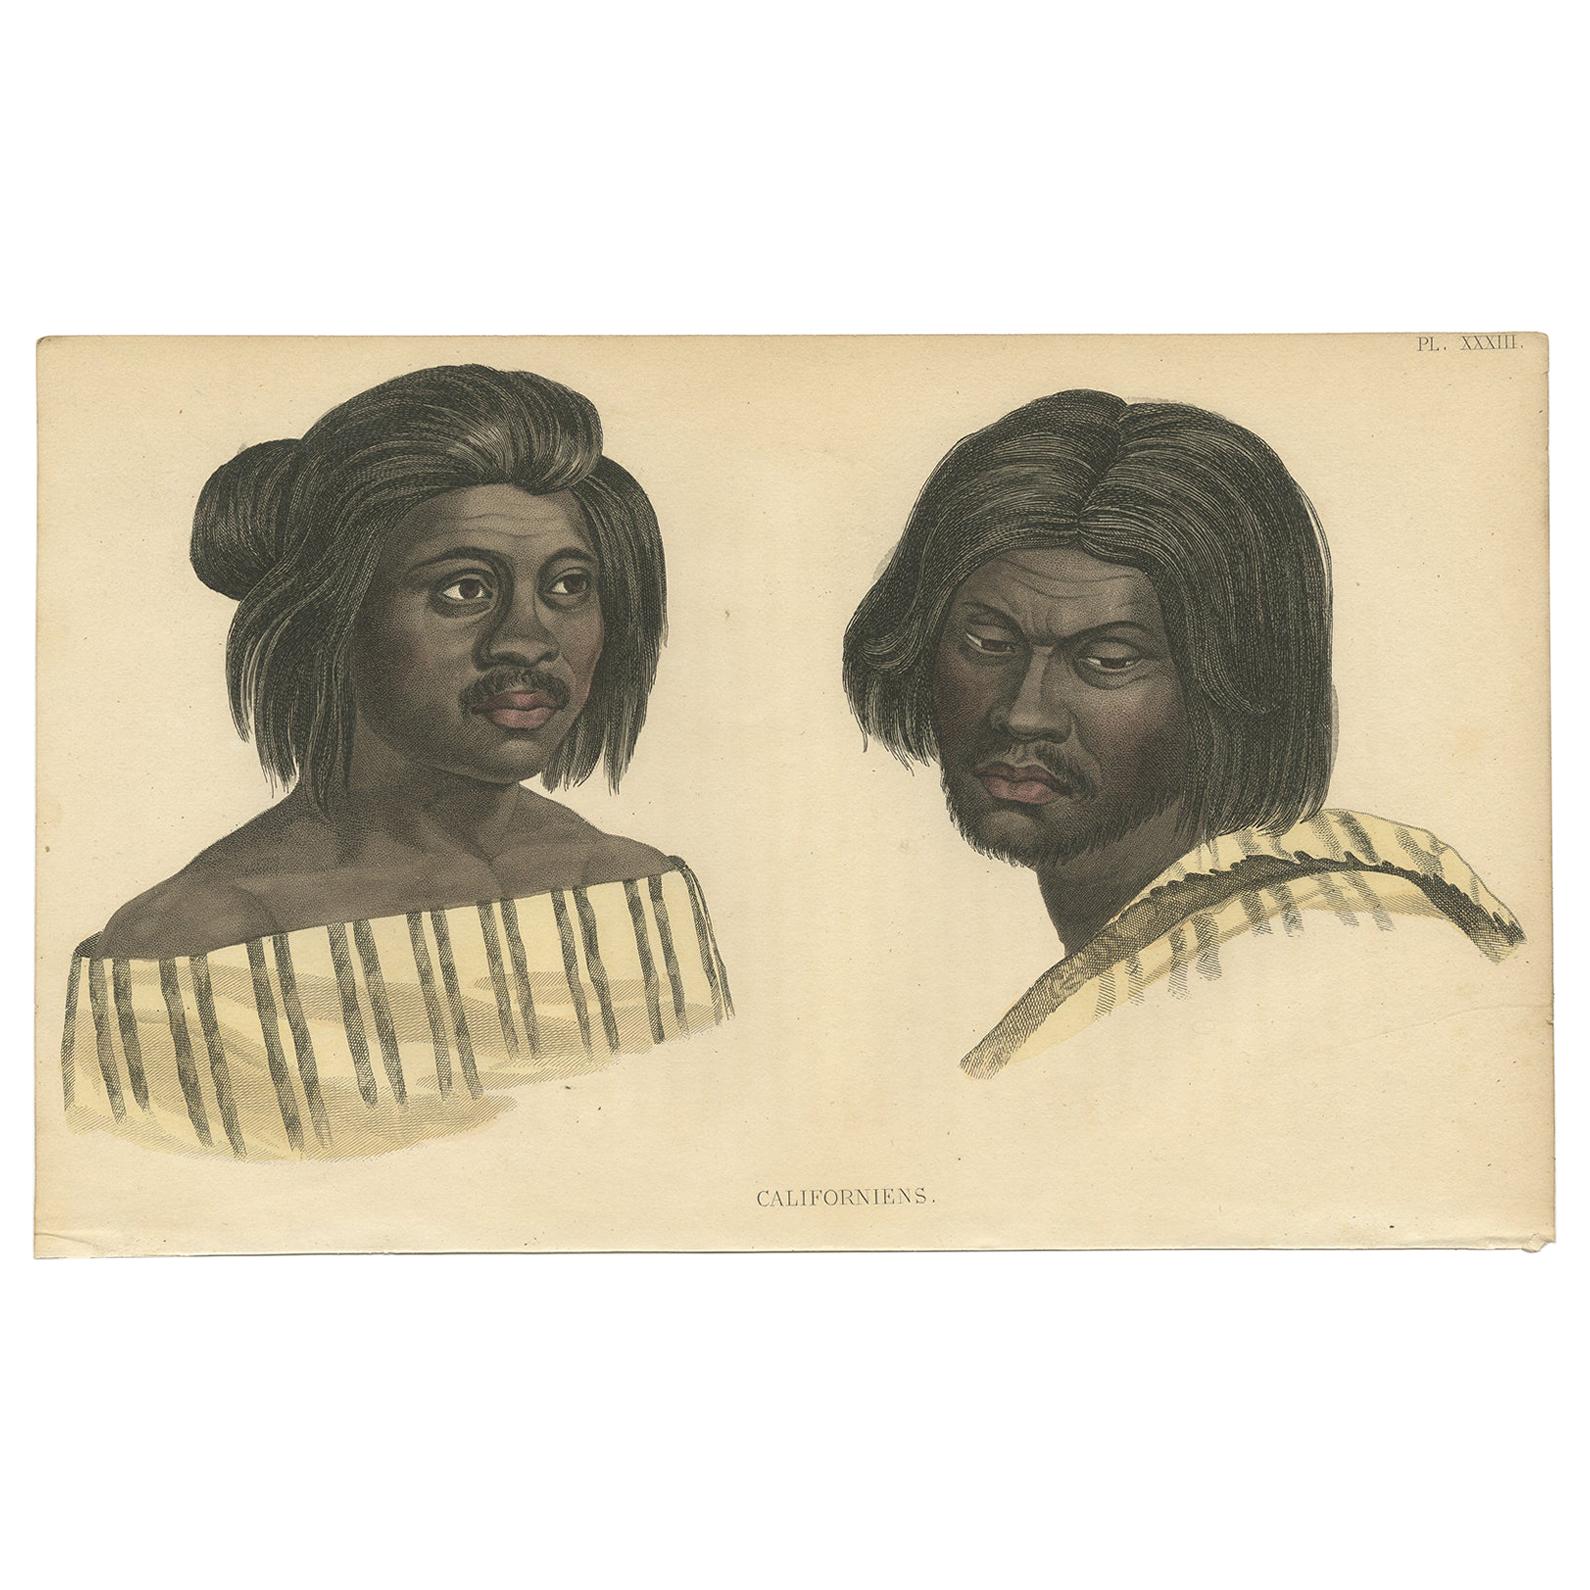 Antique Print of Native Californians by Prichard '1843' For Sale